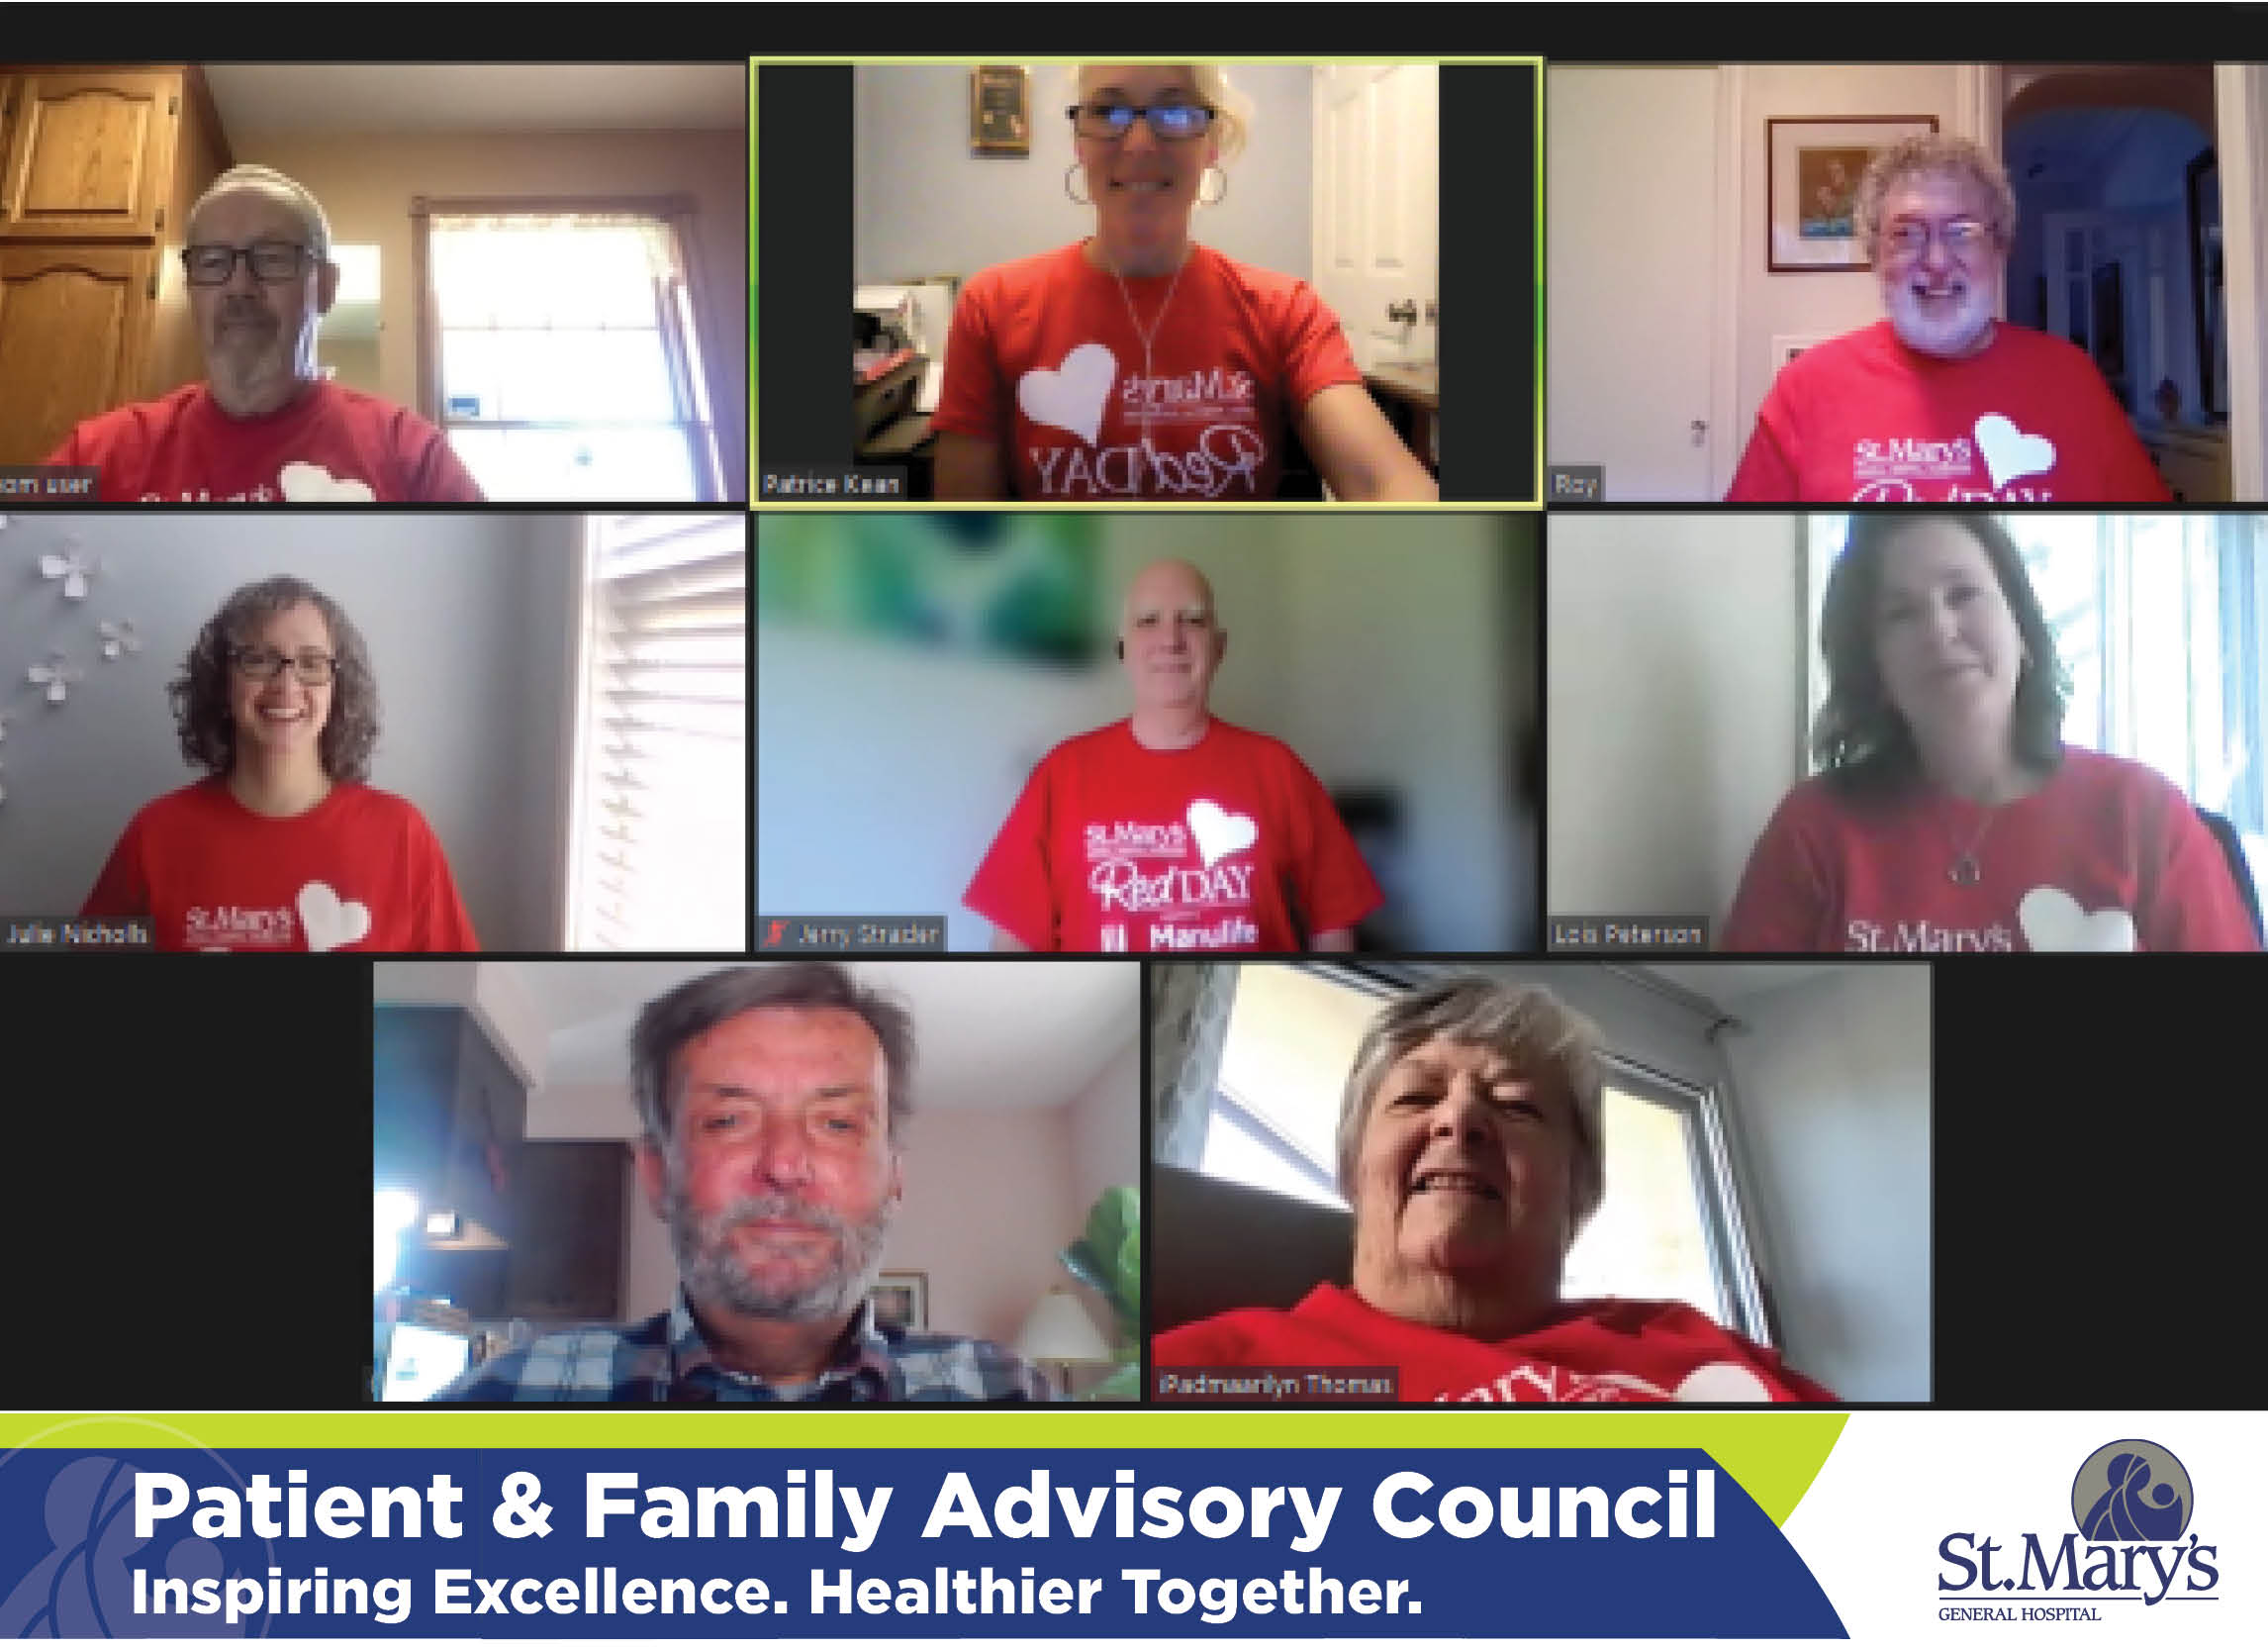 Zoom screenshot of a PFAC meeting featuring eight members and the text "Patient & Family Advisory Council. Inspiring Excellence. Healthier Together."